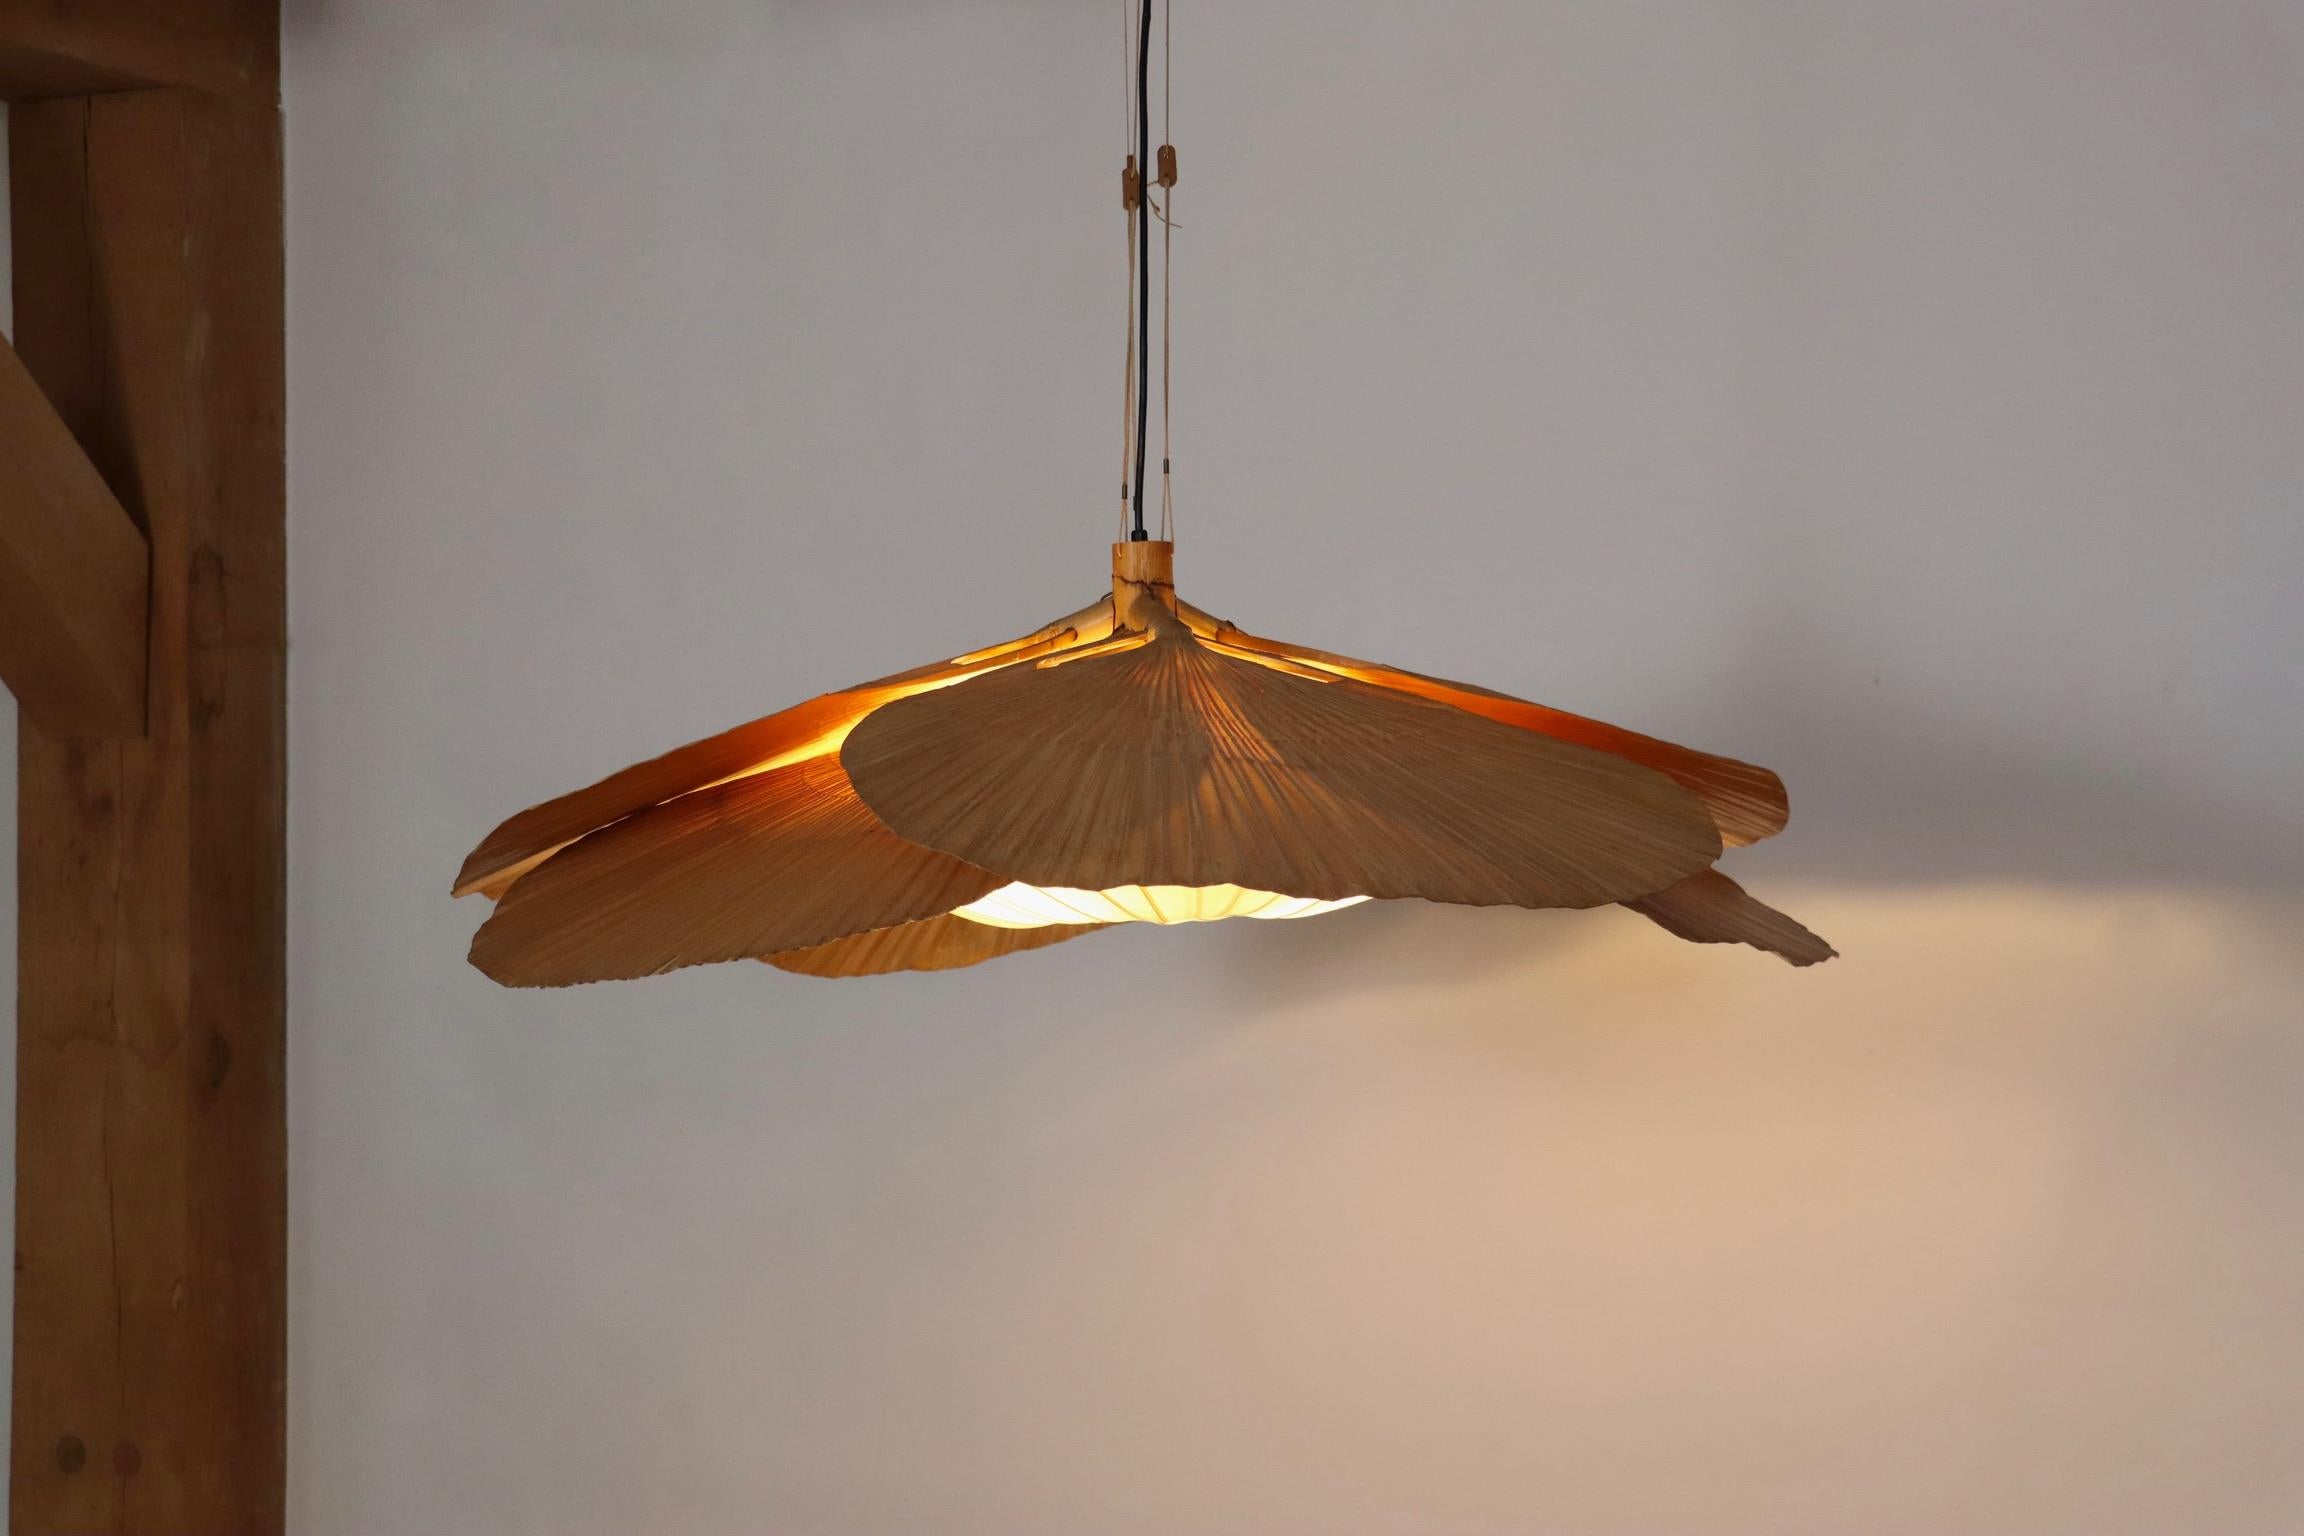 This extremely rare, exquisite pendant lamp, is a part of Ingo Maurer’s Uchiwa series, designed for Design M in 1974, which epitomizes the dynamic and innovating essence of 1970s design.

Named ‘Hana I’, this ceiling light features six fans crafted